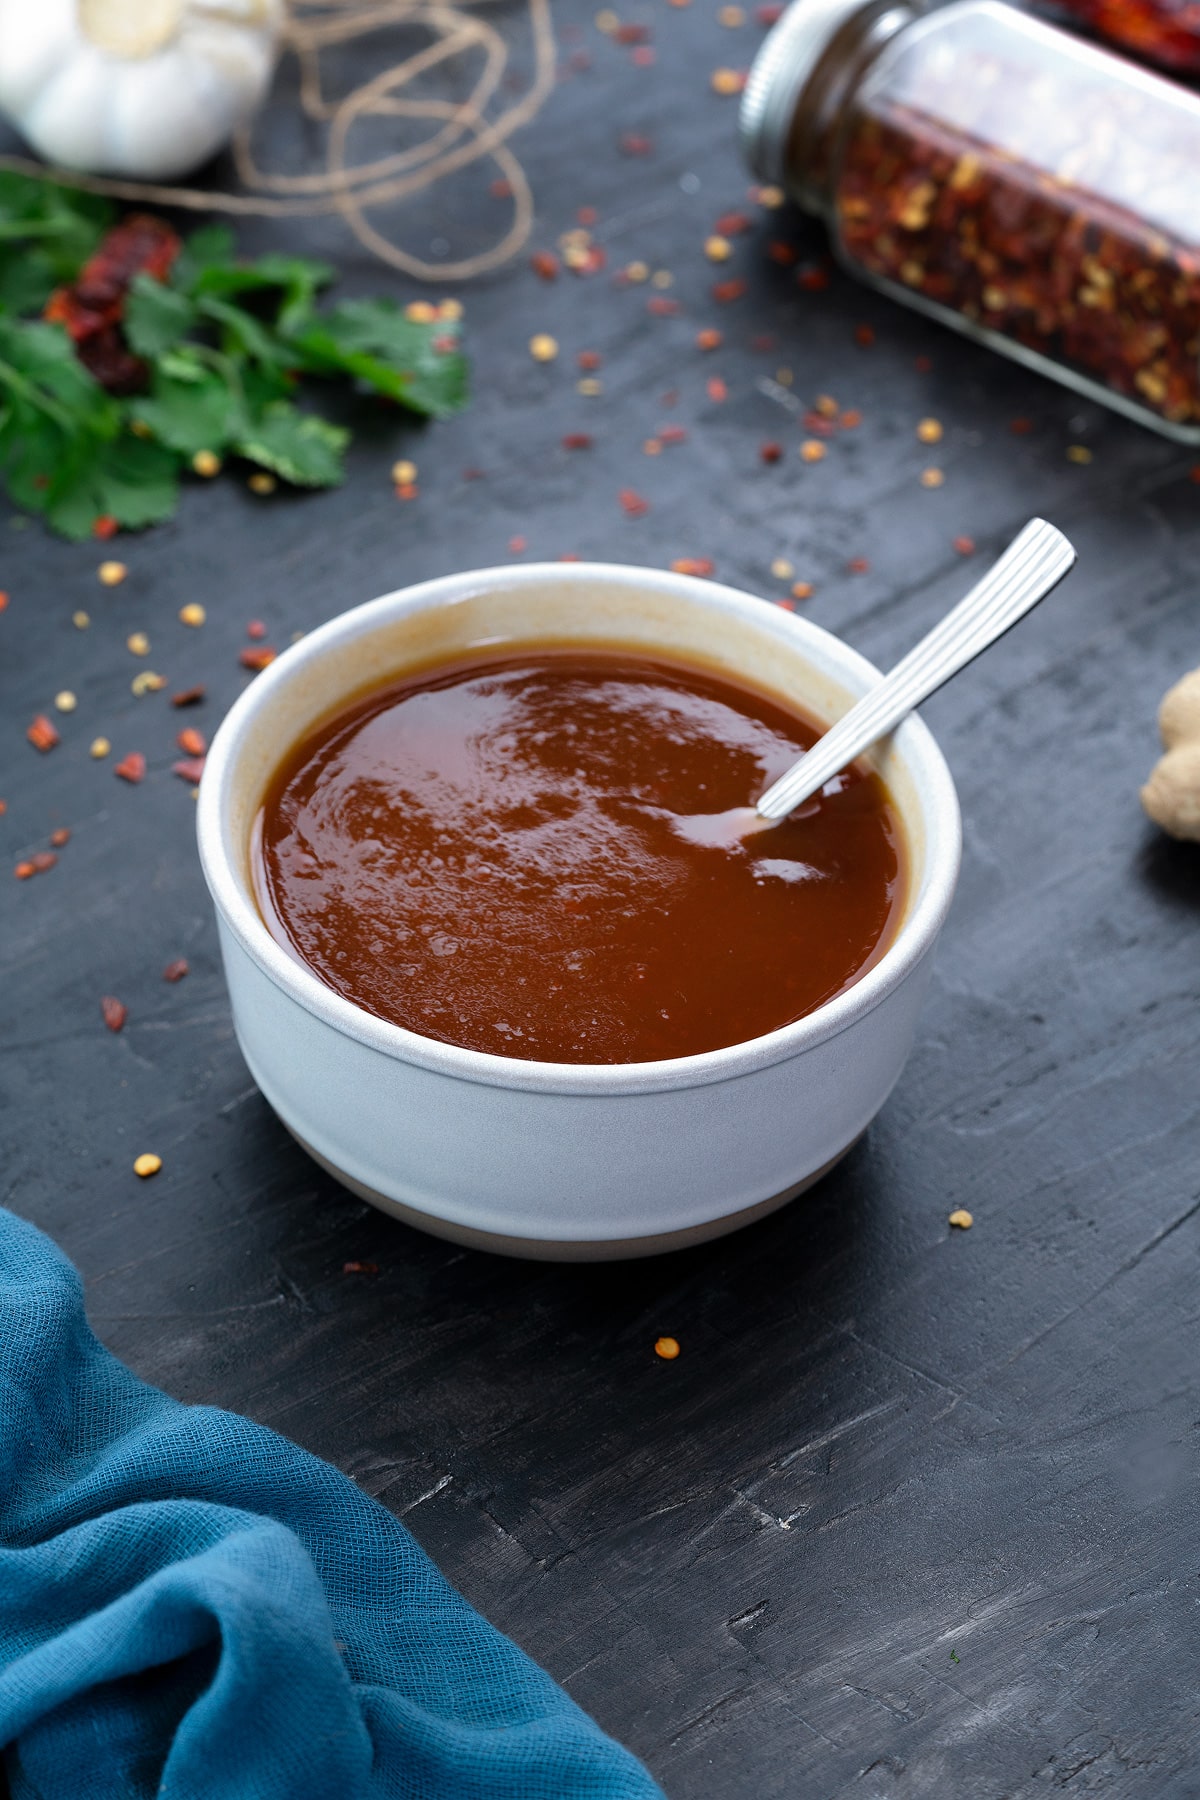 Homemade sweet and sour sauce in a white bowl.